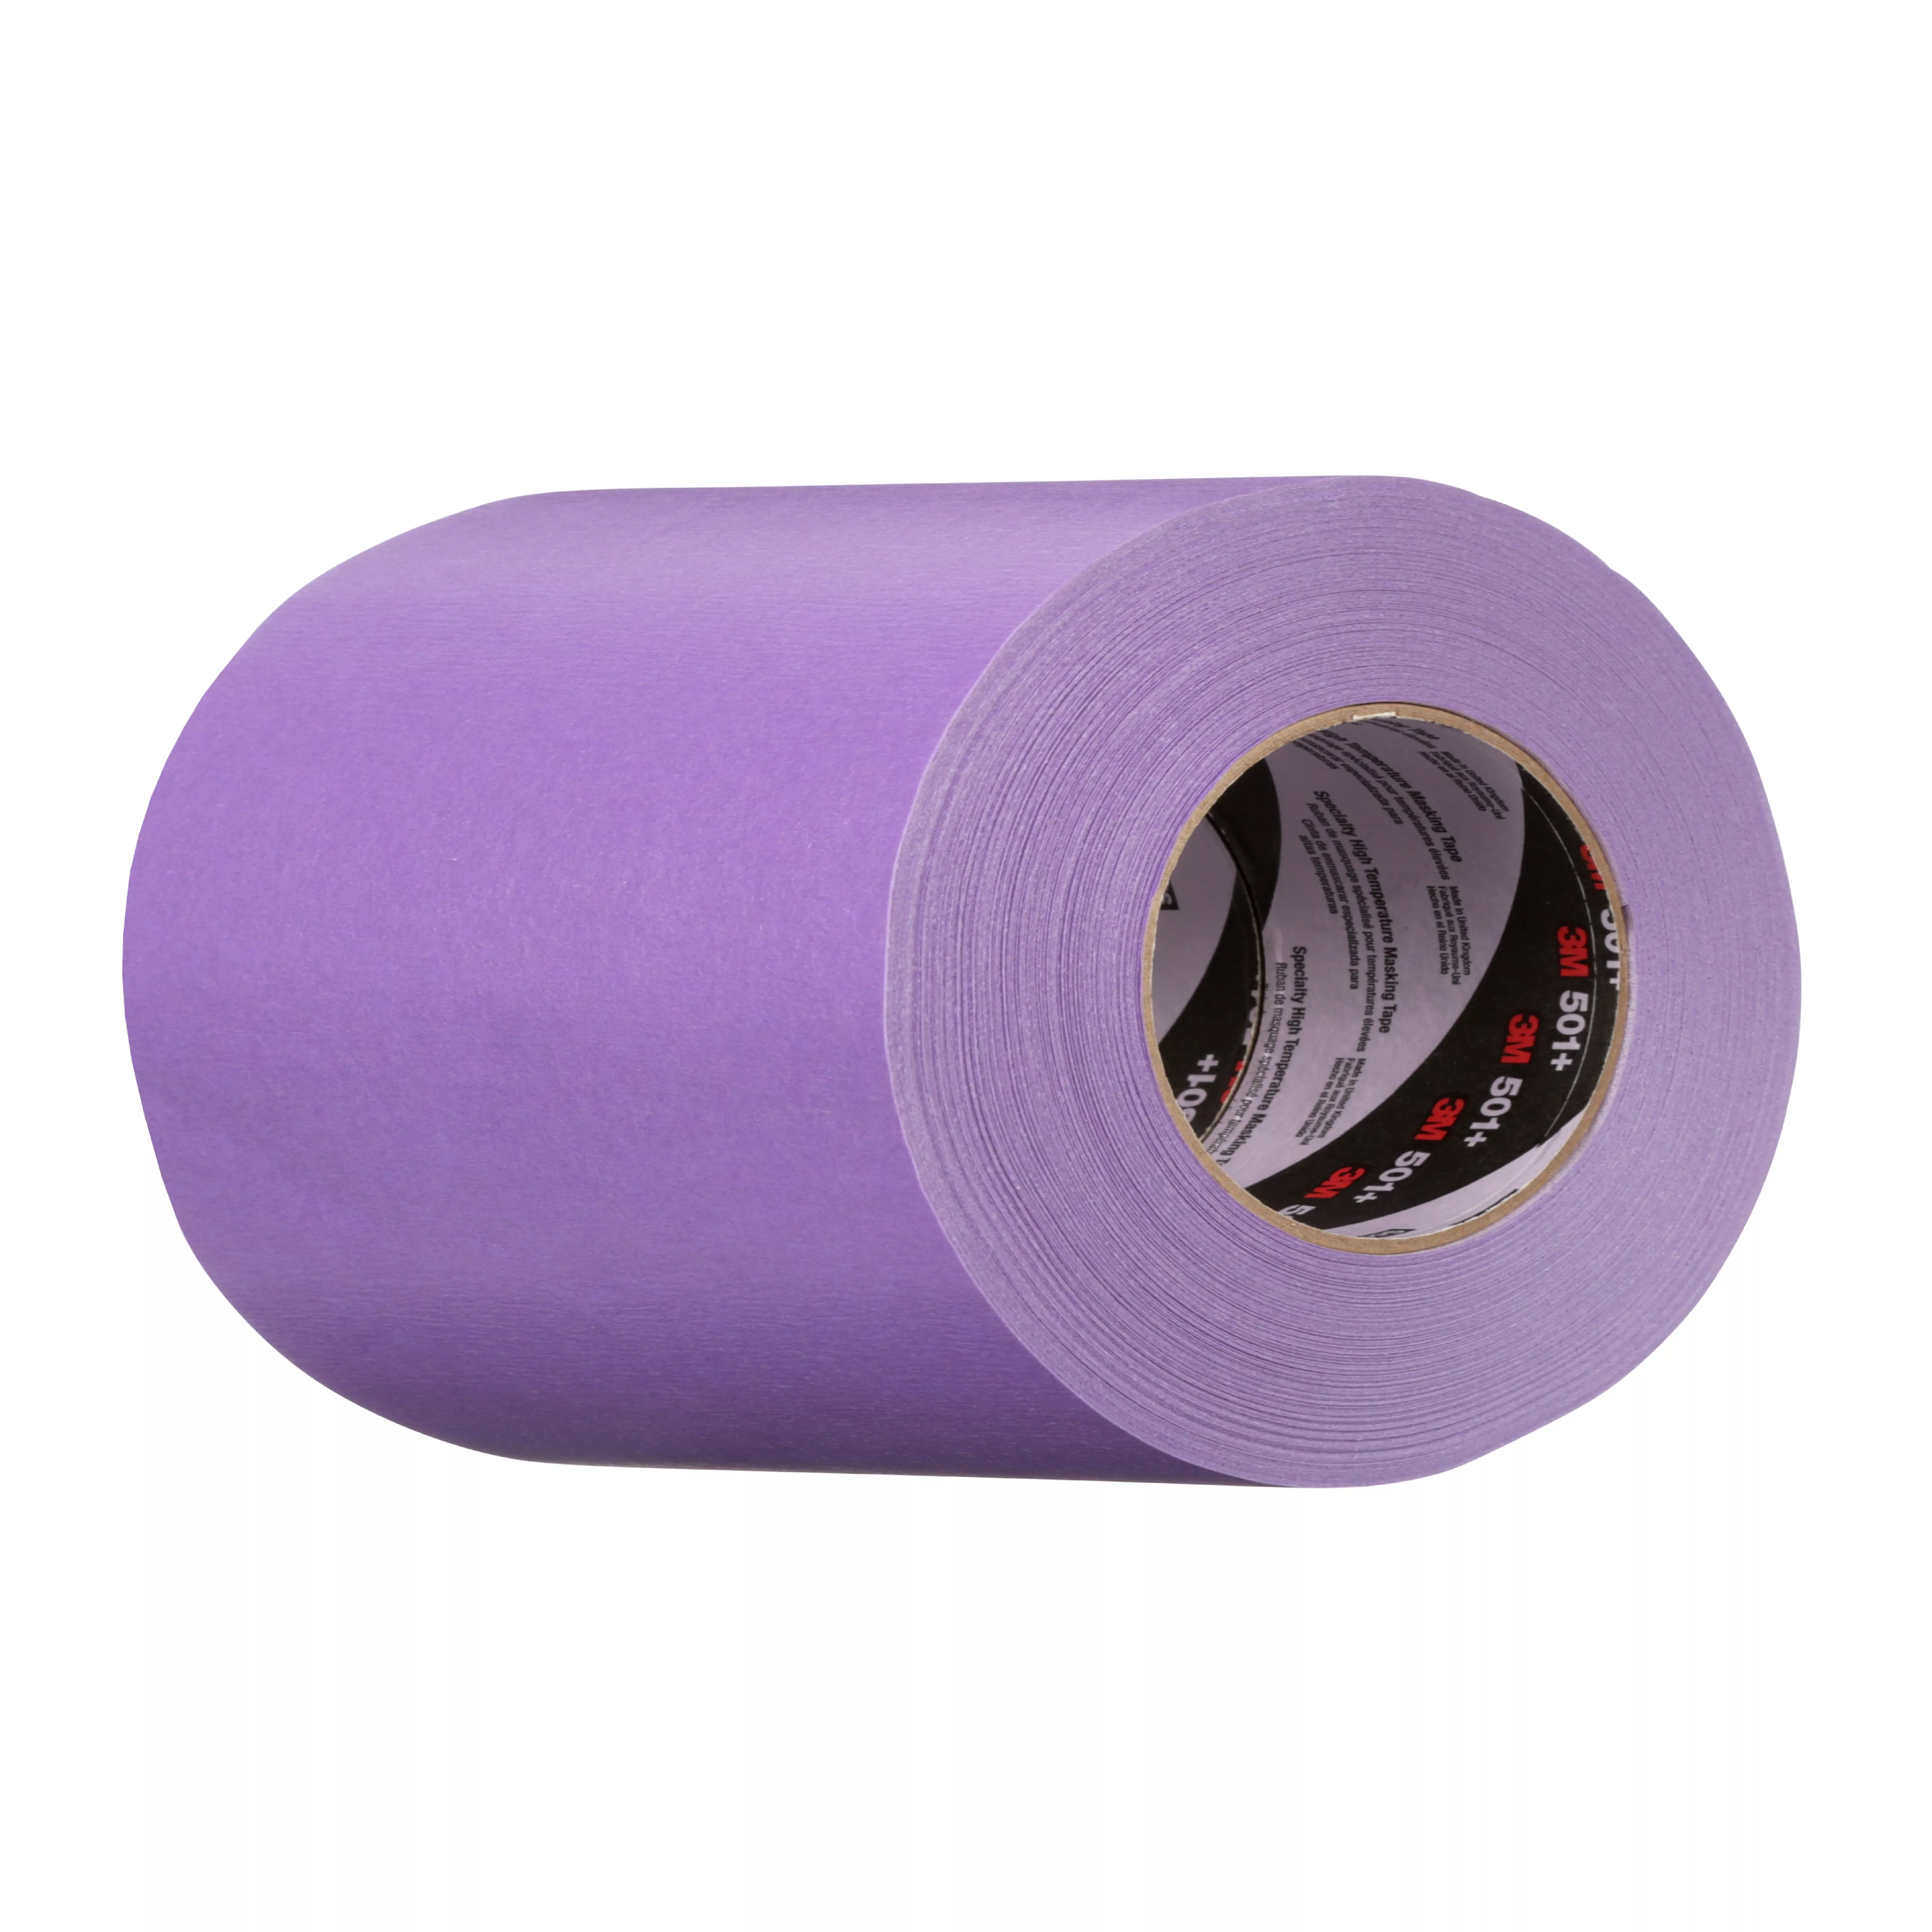 Product Number 501+ | 3M™ Specialty High Temperature Masking Tape 501+